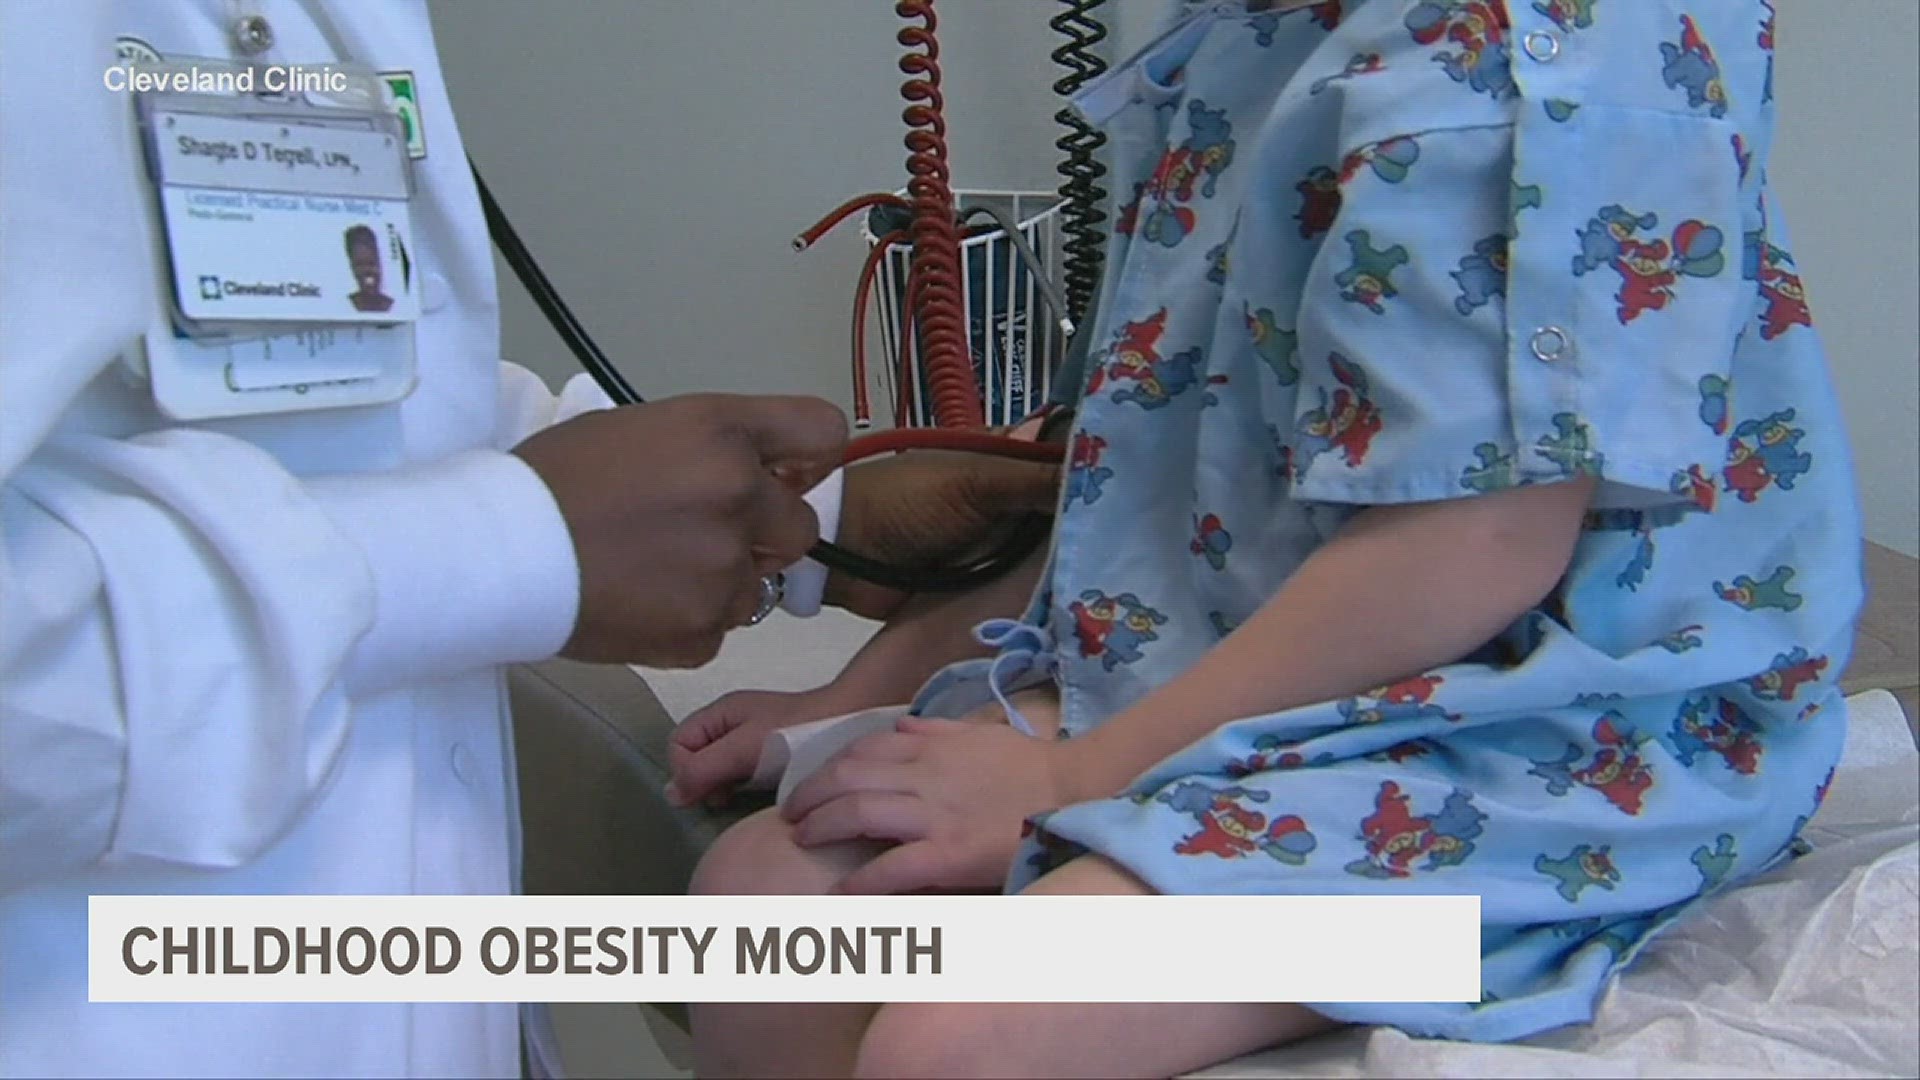 In the US about one in five children suffer from obesity, and has prompted the CDC to suggest new treatment options for kids when it's medically necessary.